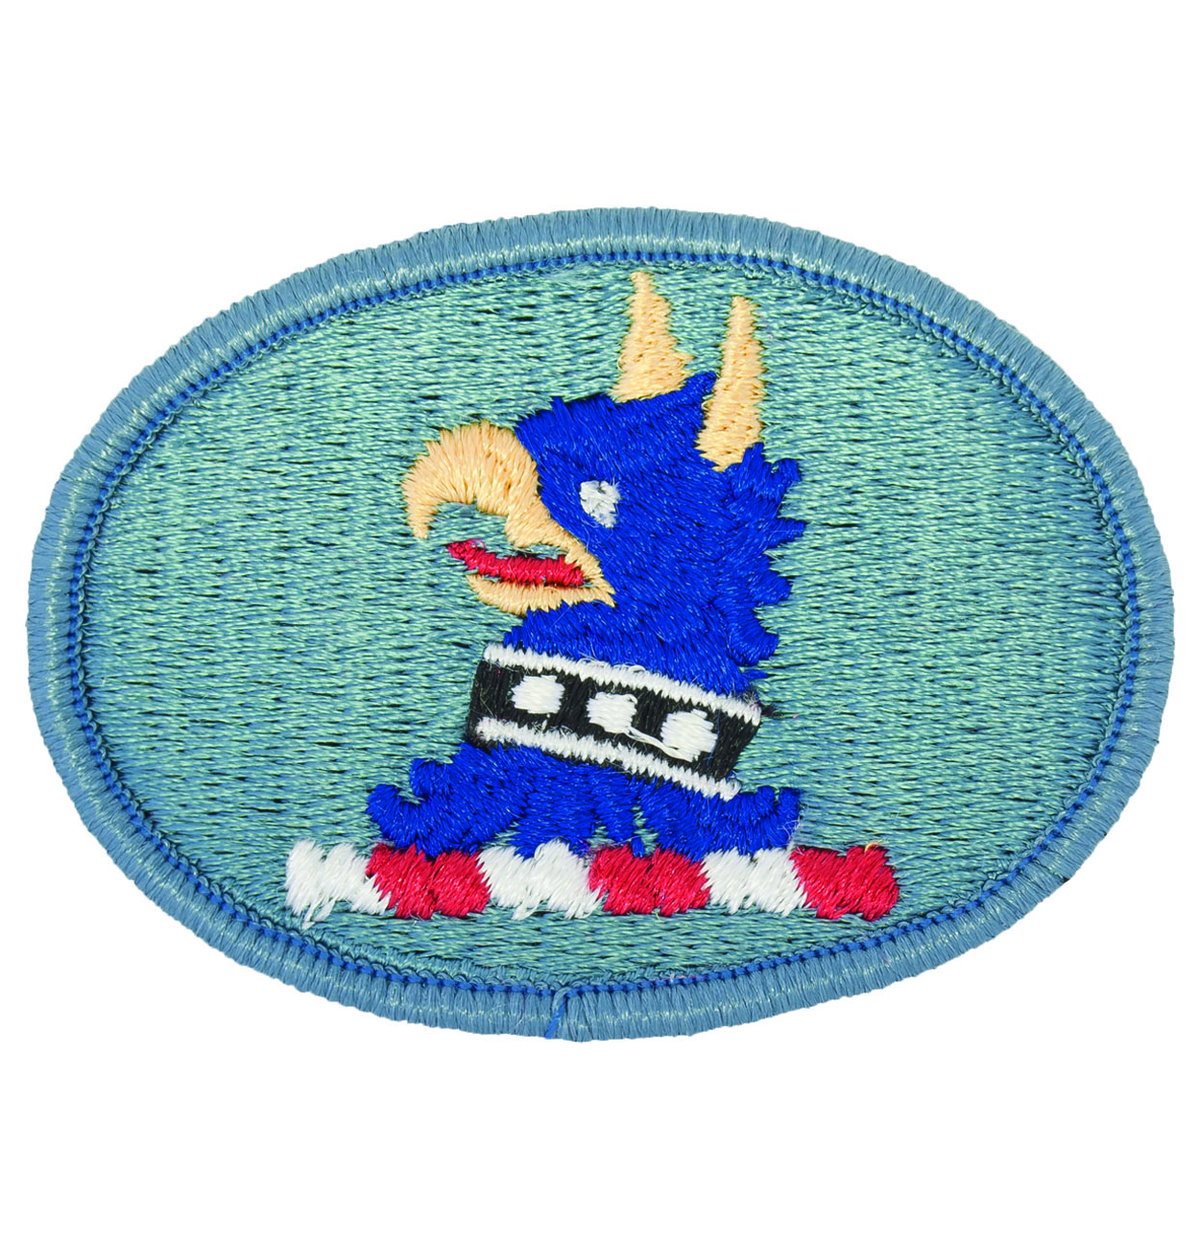 Delaware National Guard Patch - Full Color Dress Patch